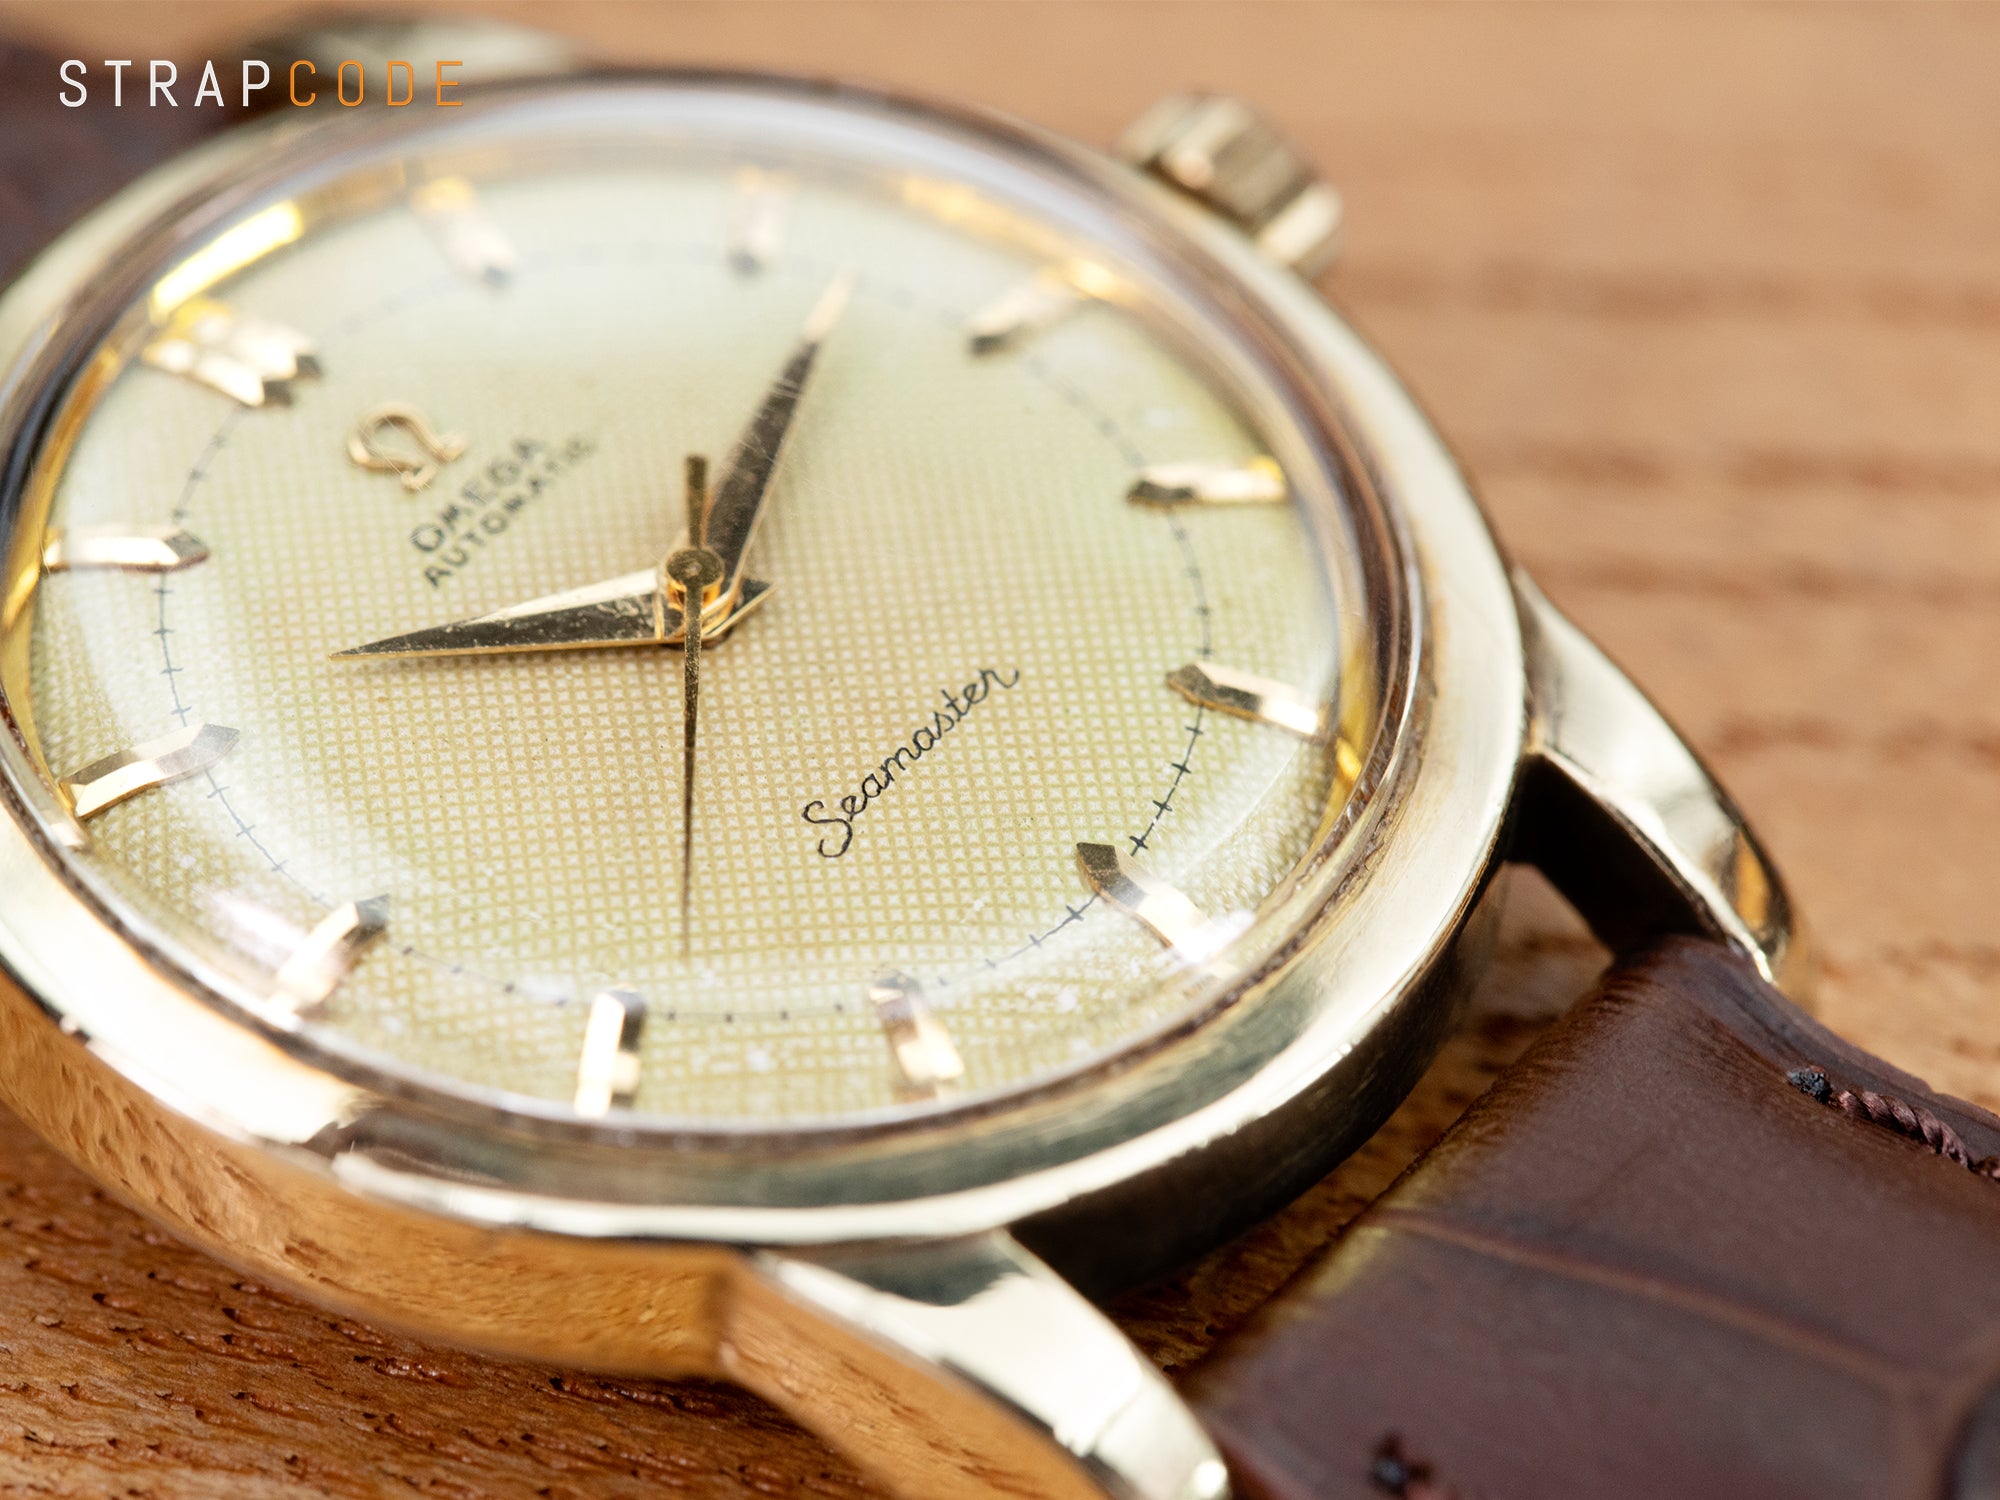 The rare Honeycomb Dial of the 1952 Omega Gold Capped Seamaster with Bumper Caliber 354